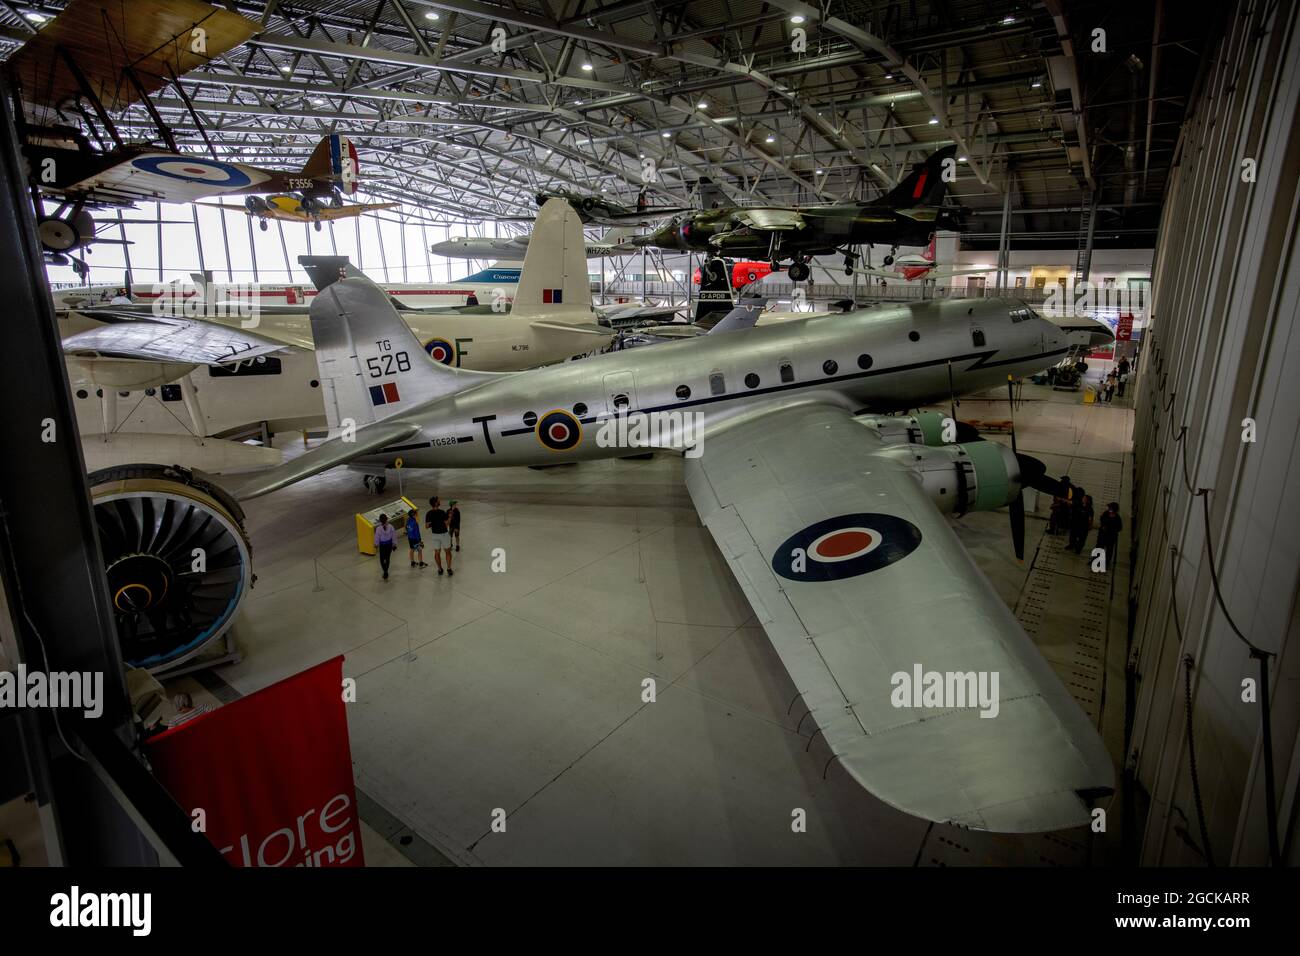 Duxford Imperial War Museum Photograph by Brian Harris 5 August 2021 IMW Duxford, Cambridgeshire England UK. Handley Page Hastings C1A Aircraft on dis Stock Photo